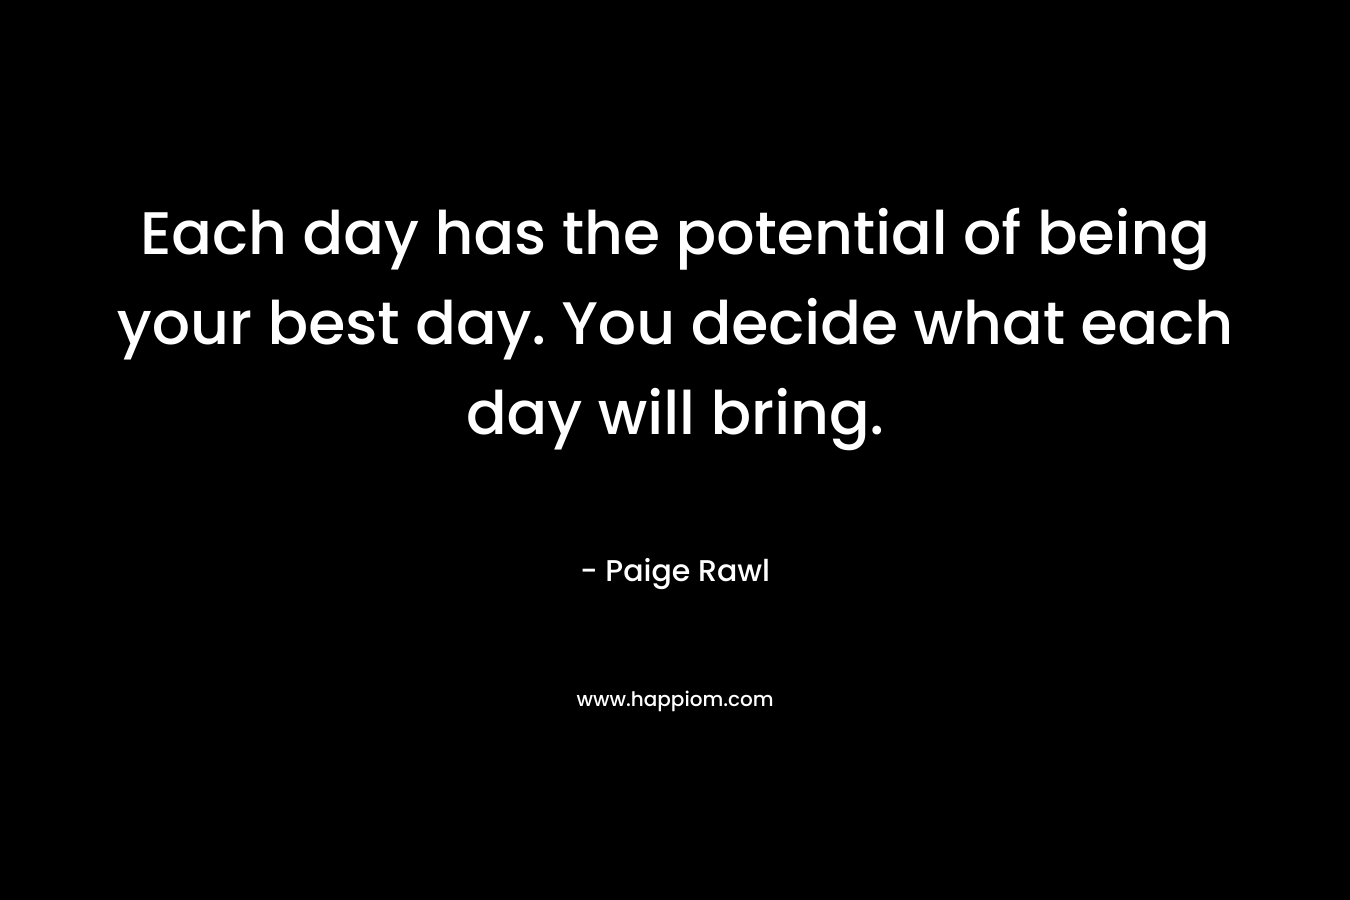 Each day has the potential of being your best day. You decide what each day will bring.